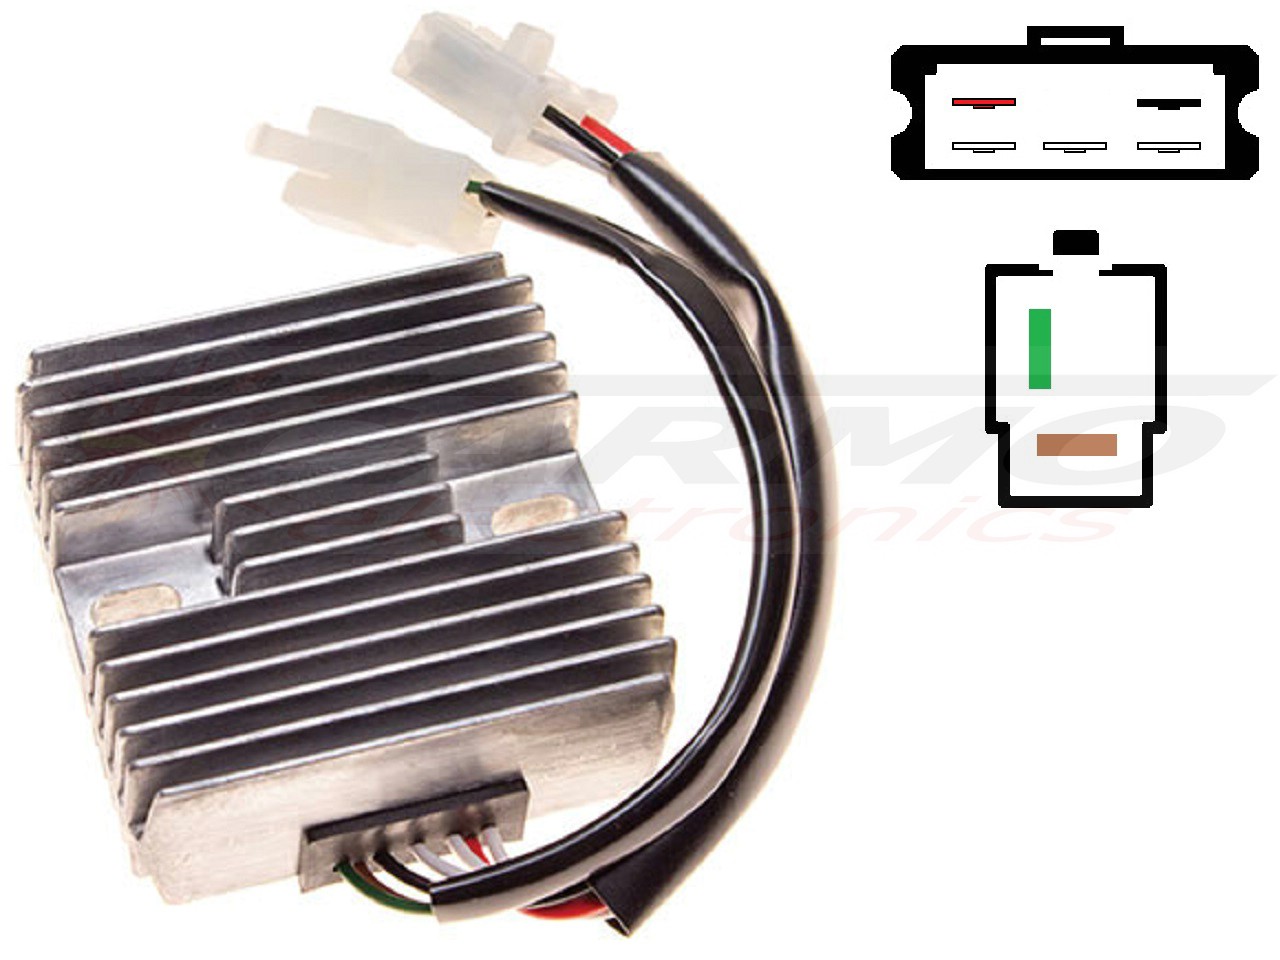 CARR311 - Yamaha XS Kawasaki KH500 MOSFET Voltage rectifier [CARR311 Yamaha XS KH regulator] - €82,50 : Carmo Electronics, The place for parts or electronics for your Motorbike Quad Scooter Car or Jetski